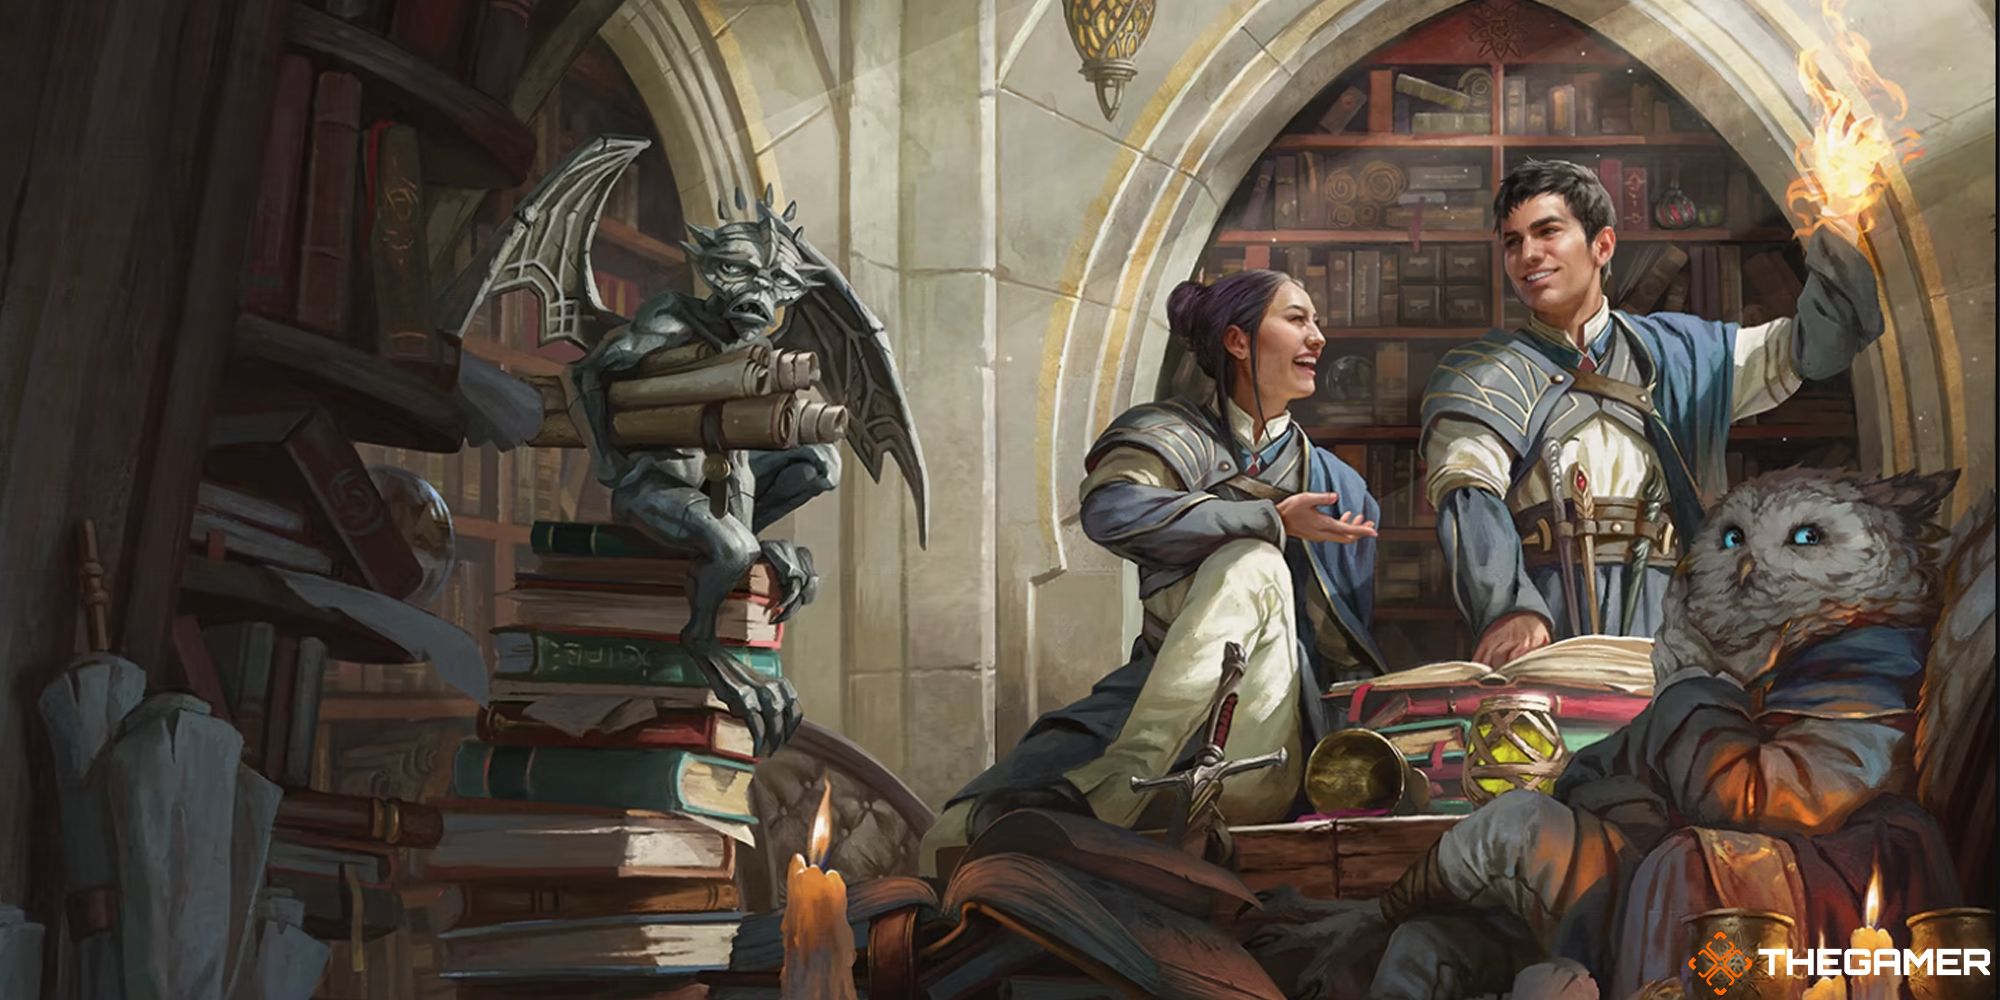 Strixhaven: A Curriculum of Chaos Cover by Magali Villeneuve. Three students study magic in a library while a small gargoyle is bored.